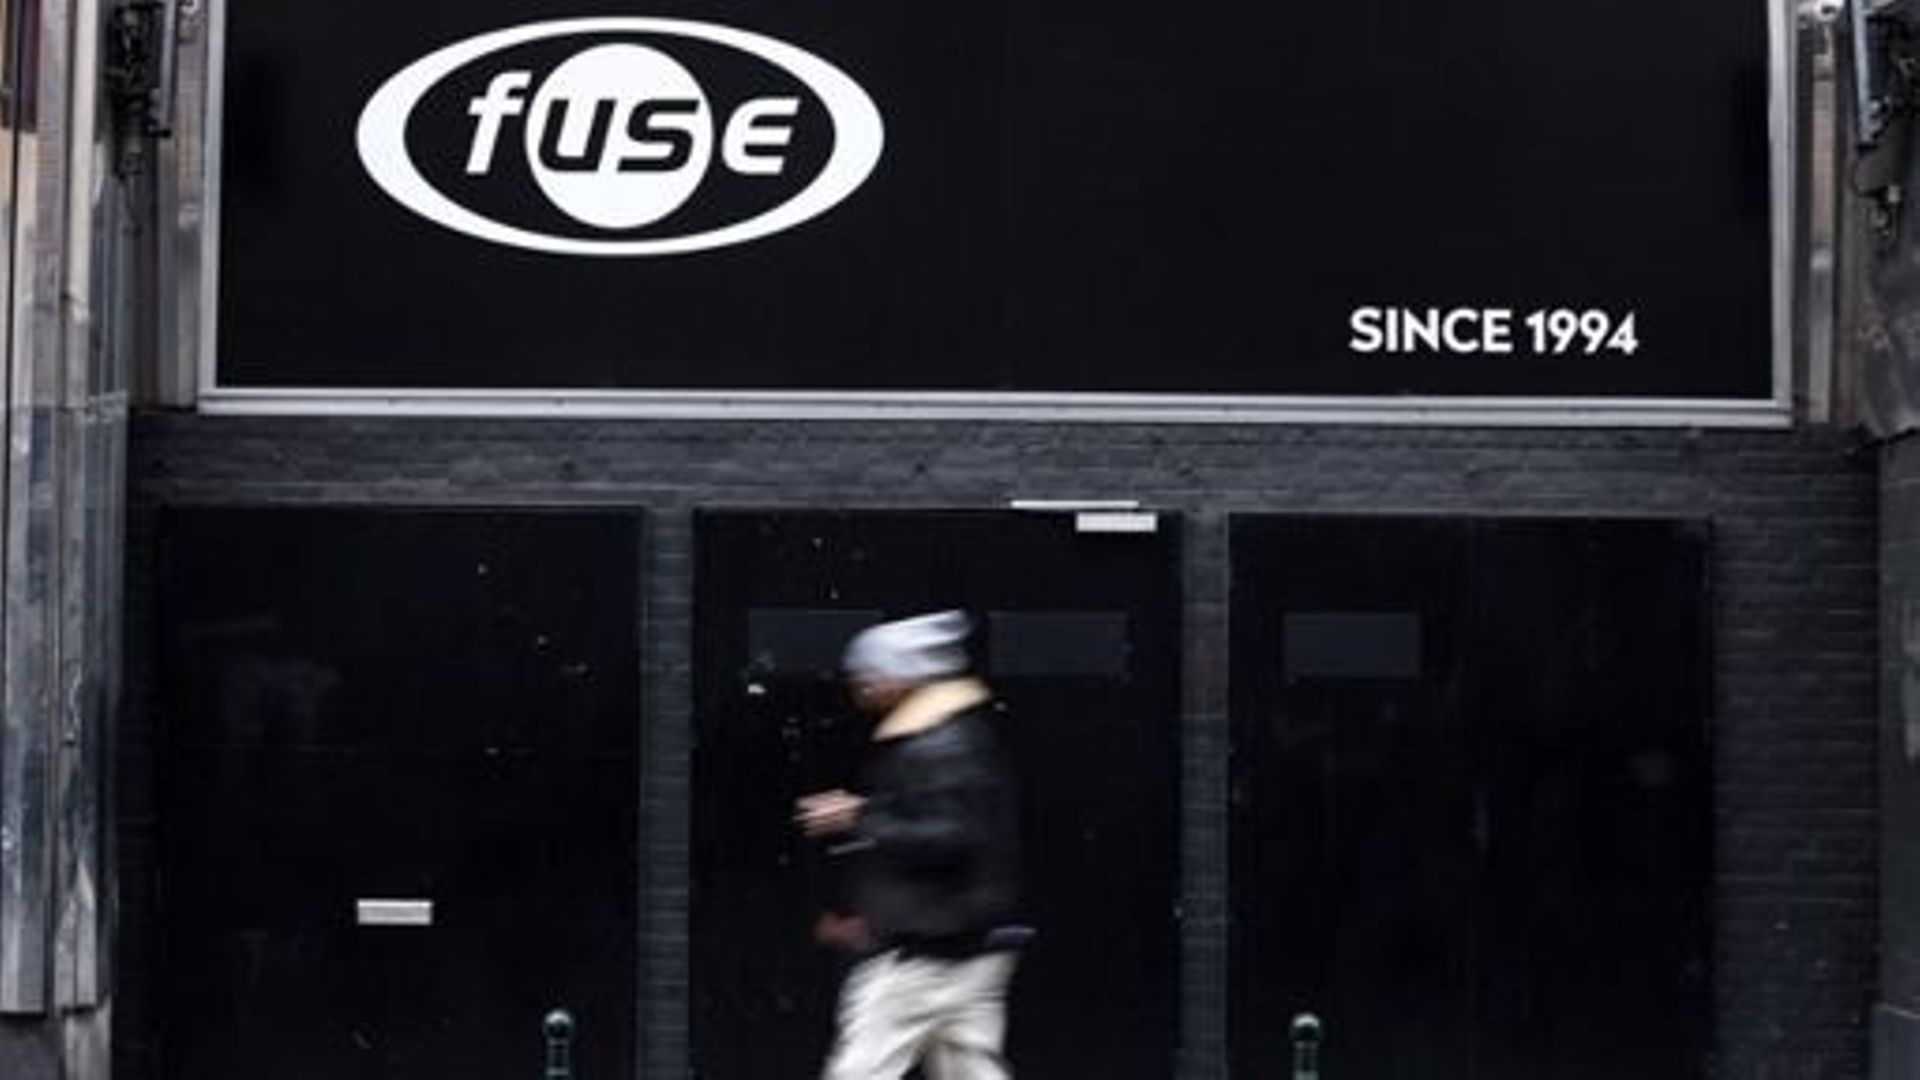 A pedestrian walks past the Fuse nightclub, in Brussels, on January 13, 2023. The decision stems from an adjacent neighbour who complained about the sound emanating from the nightclub. As a result, regional authorities demanded that the venue play music